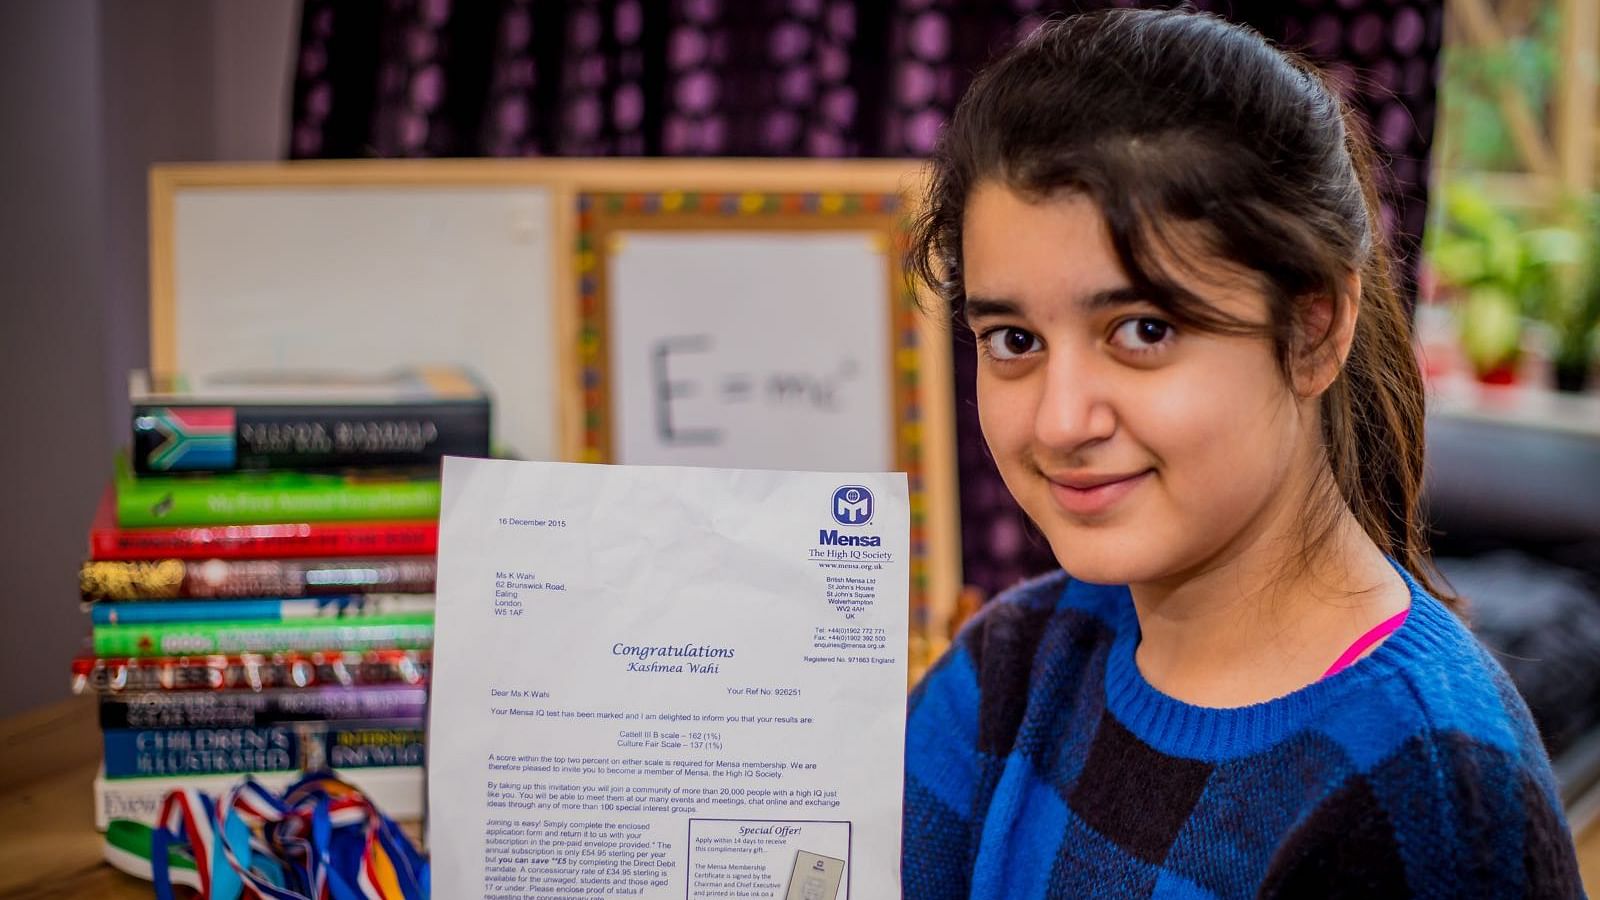 11-year-old Kashmea Wahi is one of the youngest people in the world to clear the high IQ test, Mensa. (Photo: Kashmea Wahi)